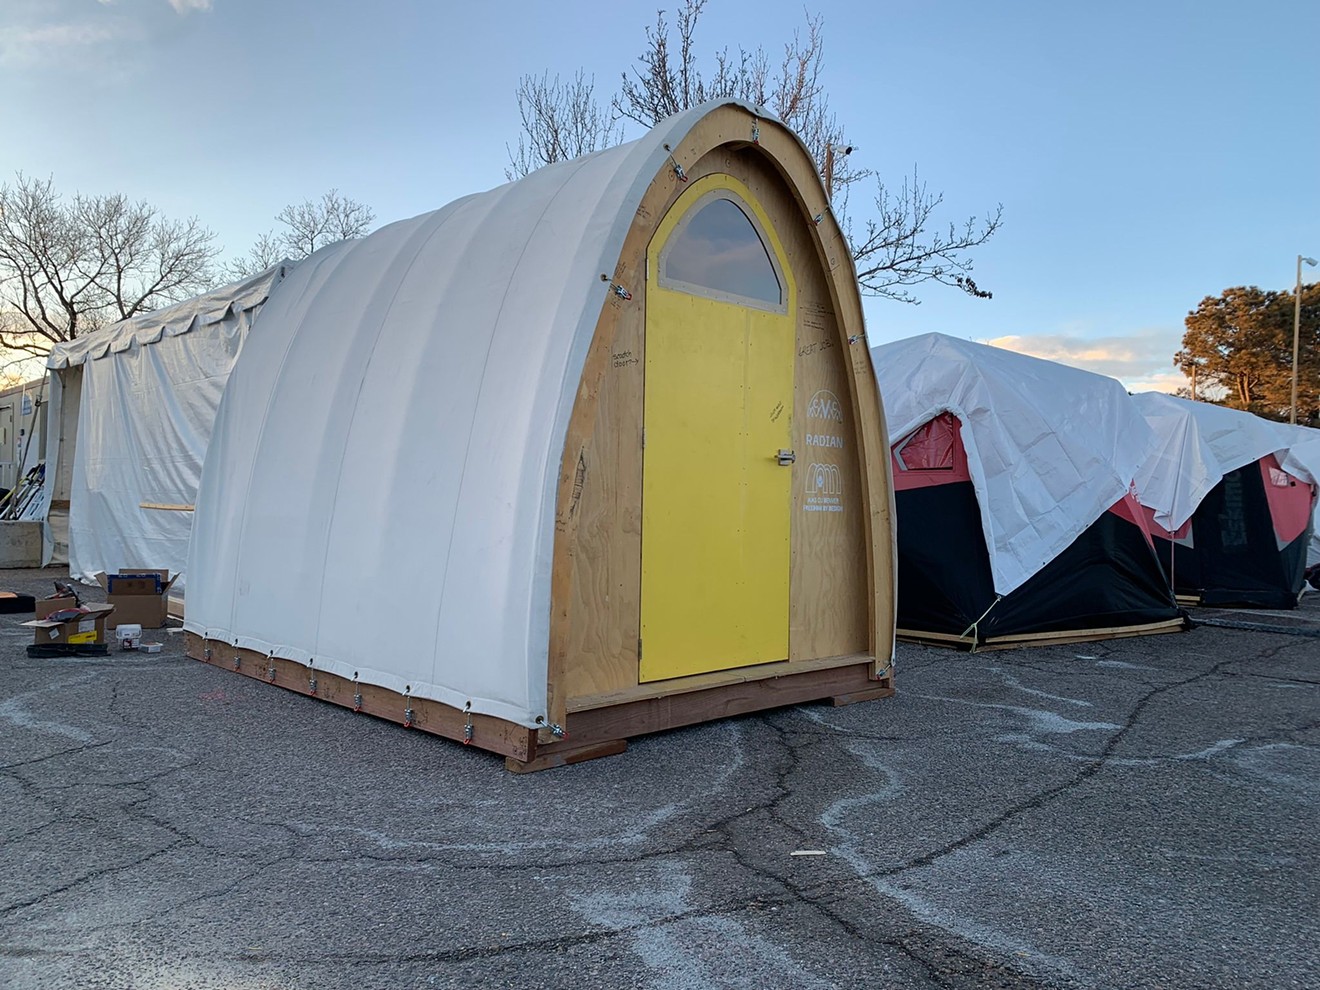 CU Denver architecture students hope this  will become the archetype structure at Denver safe-camping sites.